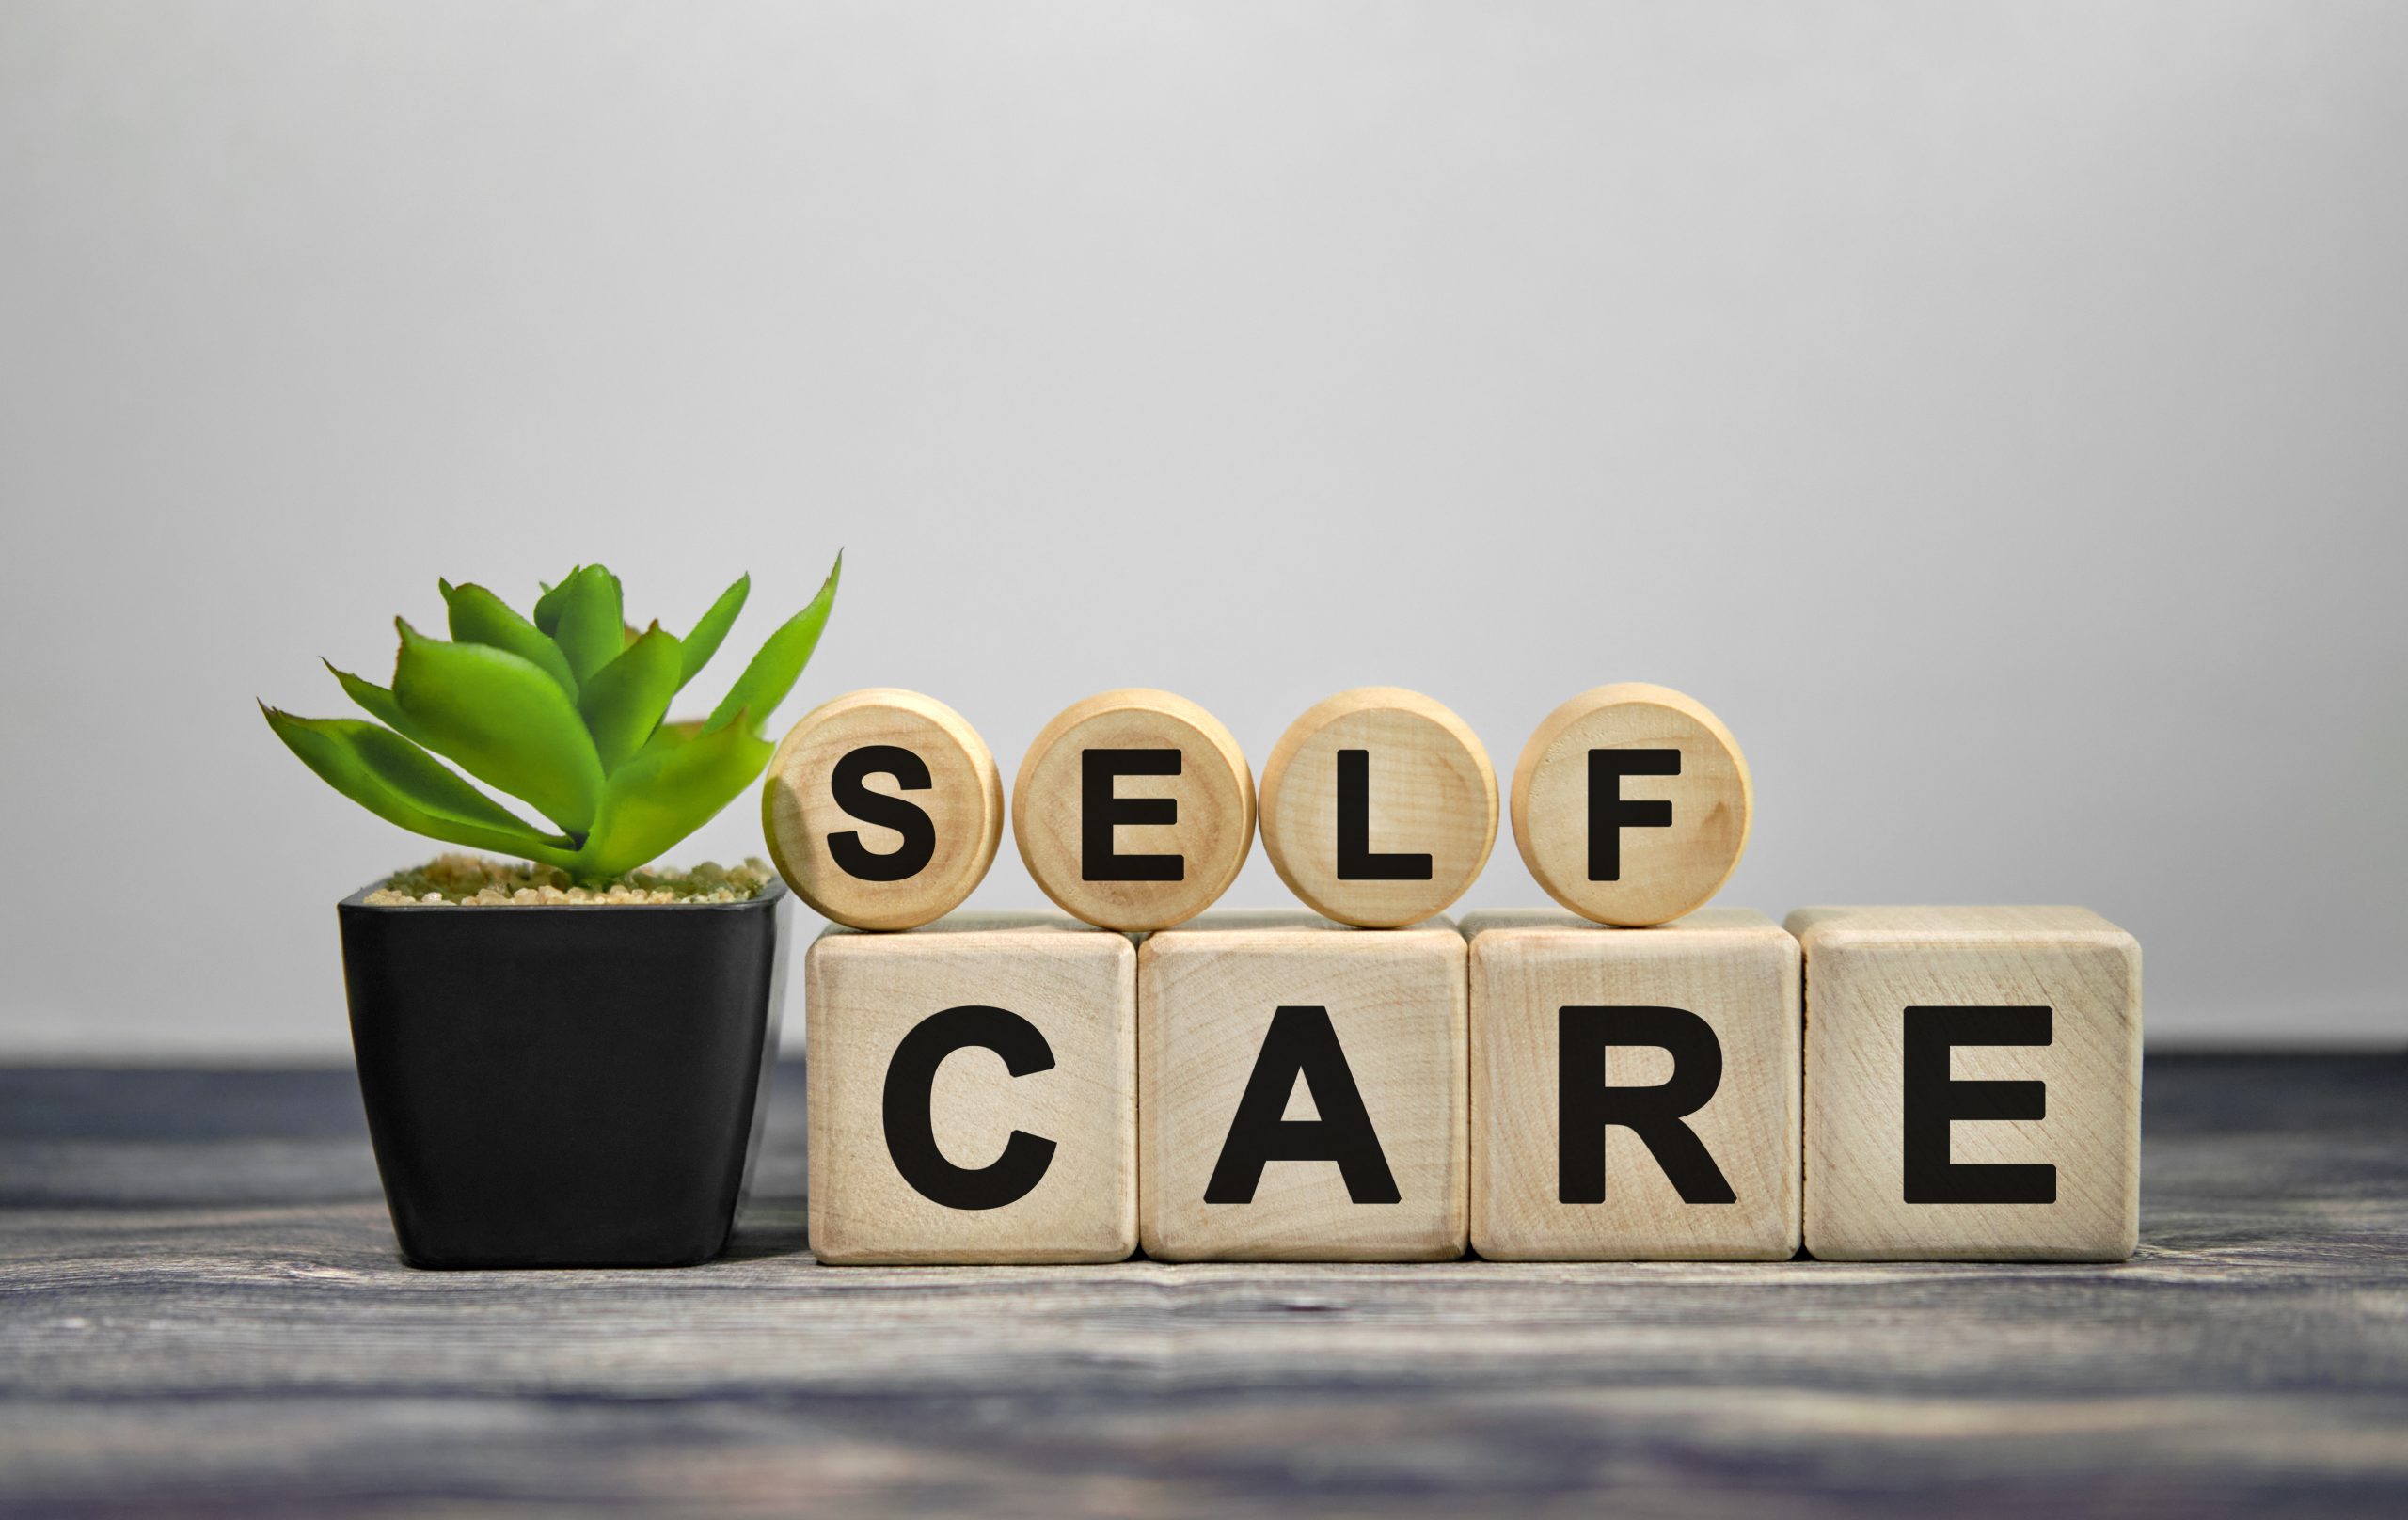 SELF CARE - text on wooden cubes, green plant in black pot on a wooden background